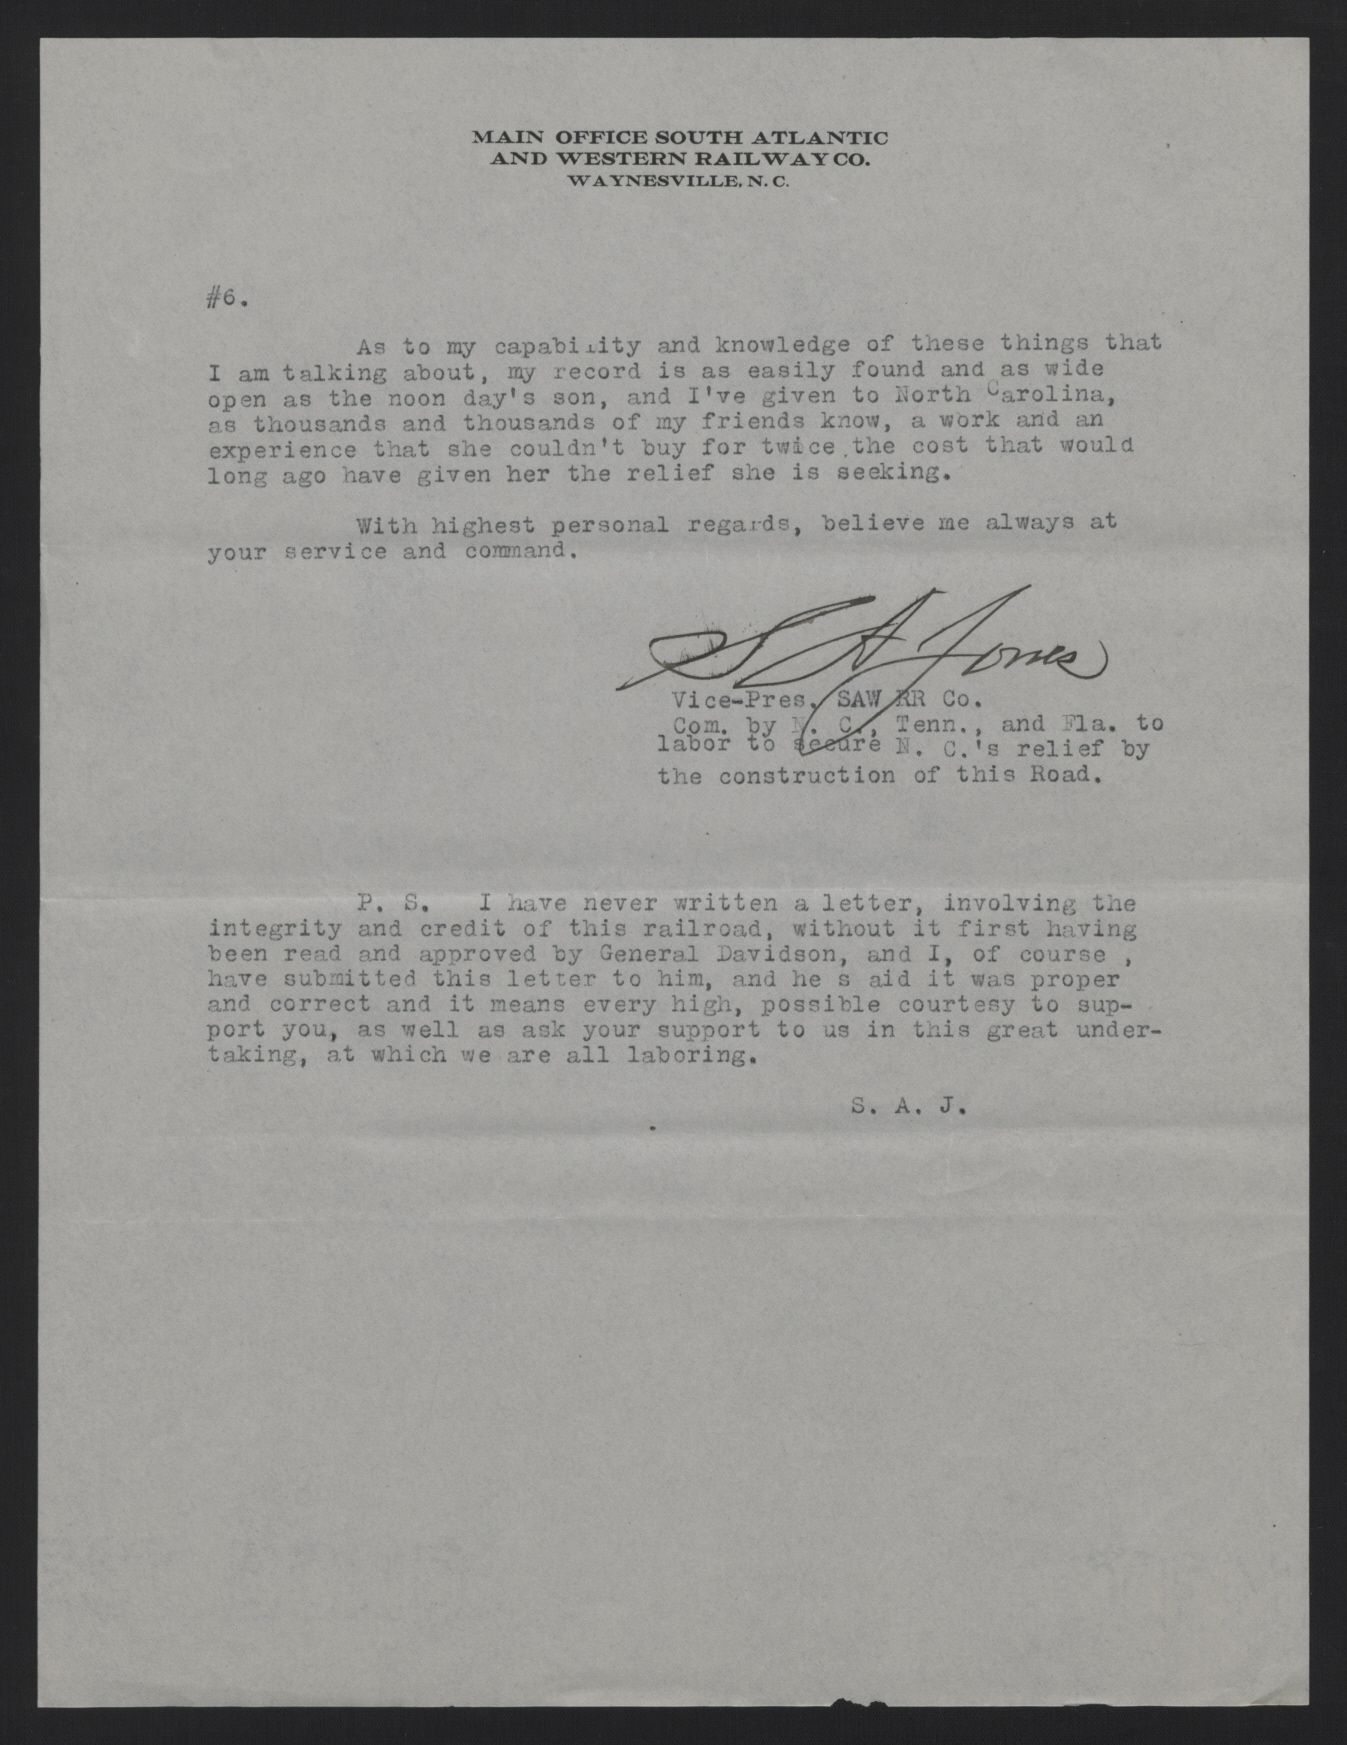 Letter from Jones to Craig, May 22, 1913, page 6